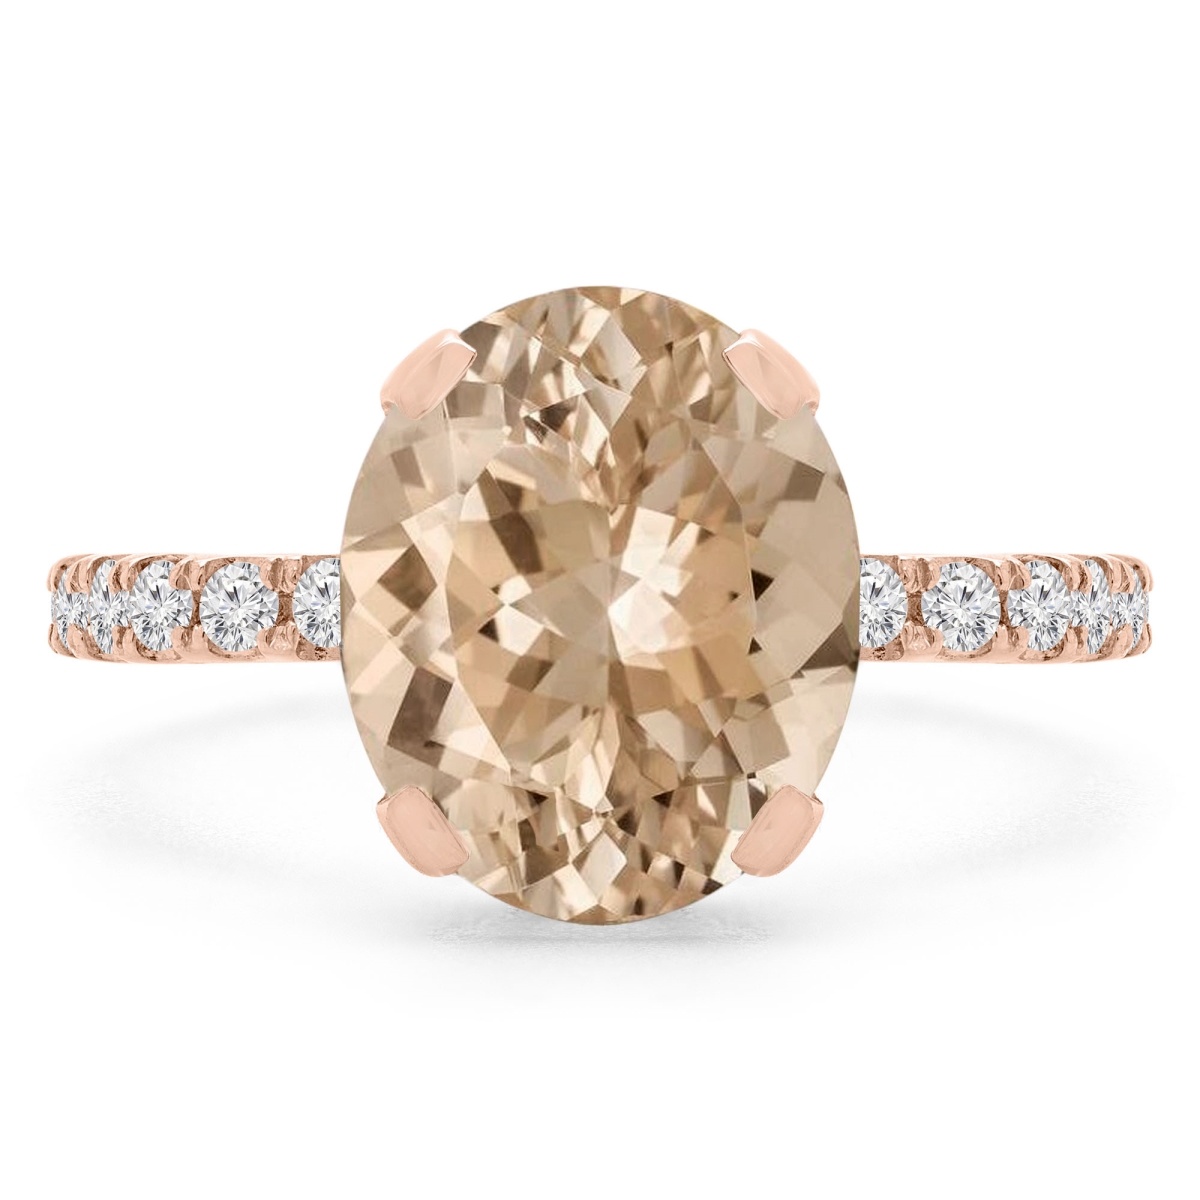 Picture of Majesty Diamonds MD190407-4.5 3.4 CTW Oval Pink Morganite Under Halo Engagement Ring in 14K Rose Gold - Size 4.5